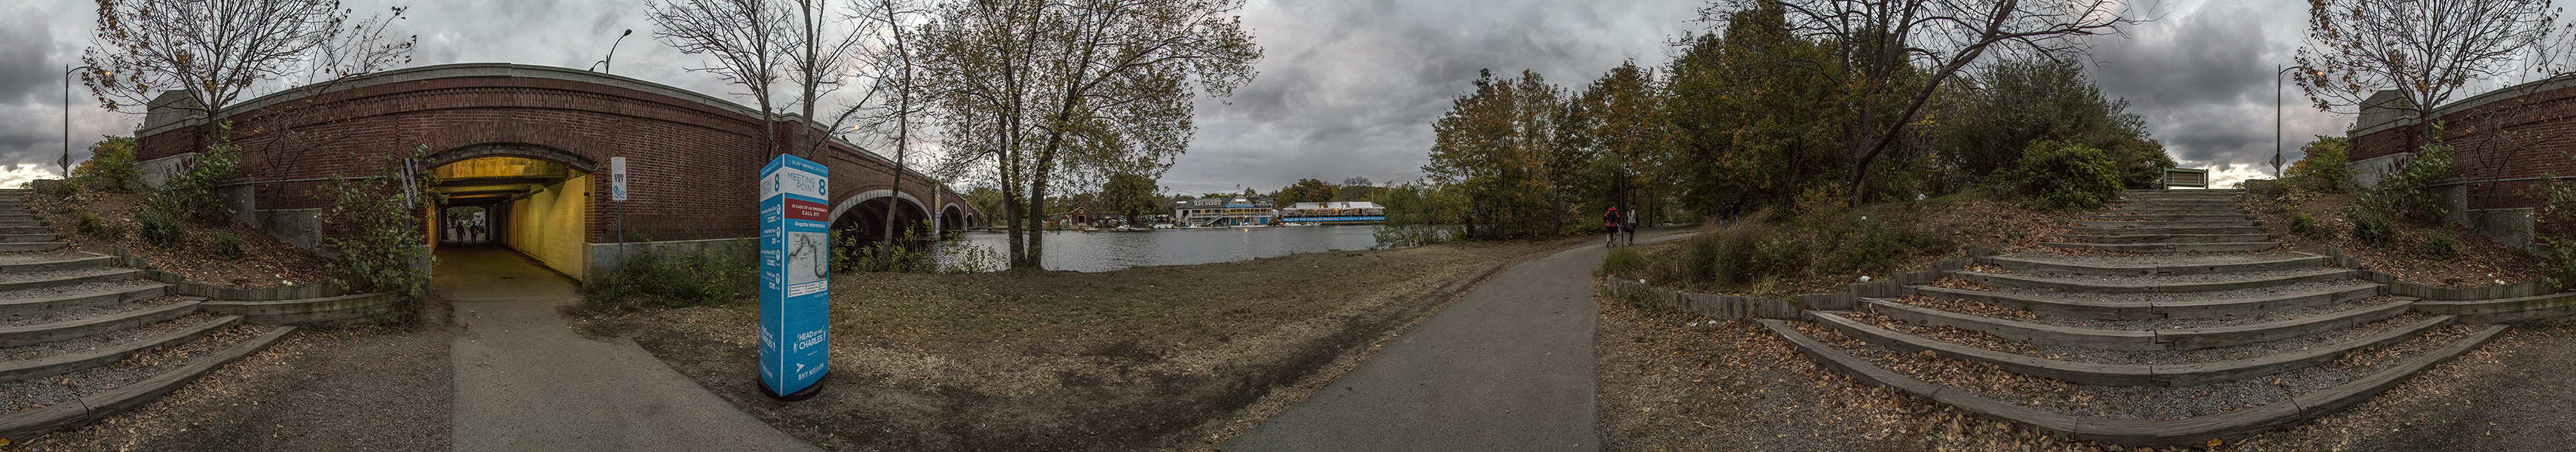 Head of the Charles 2014 #20